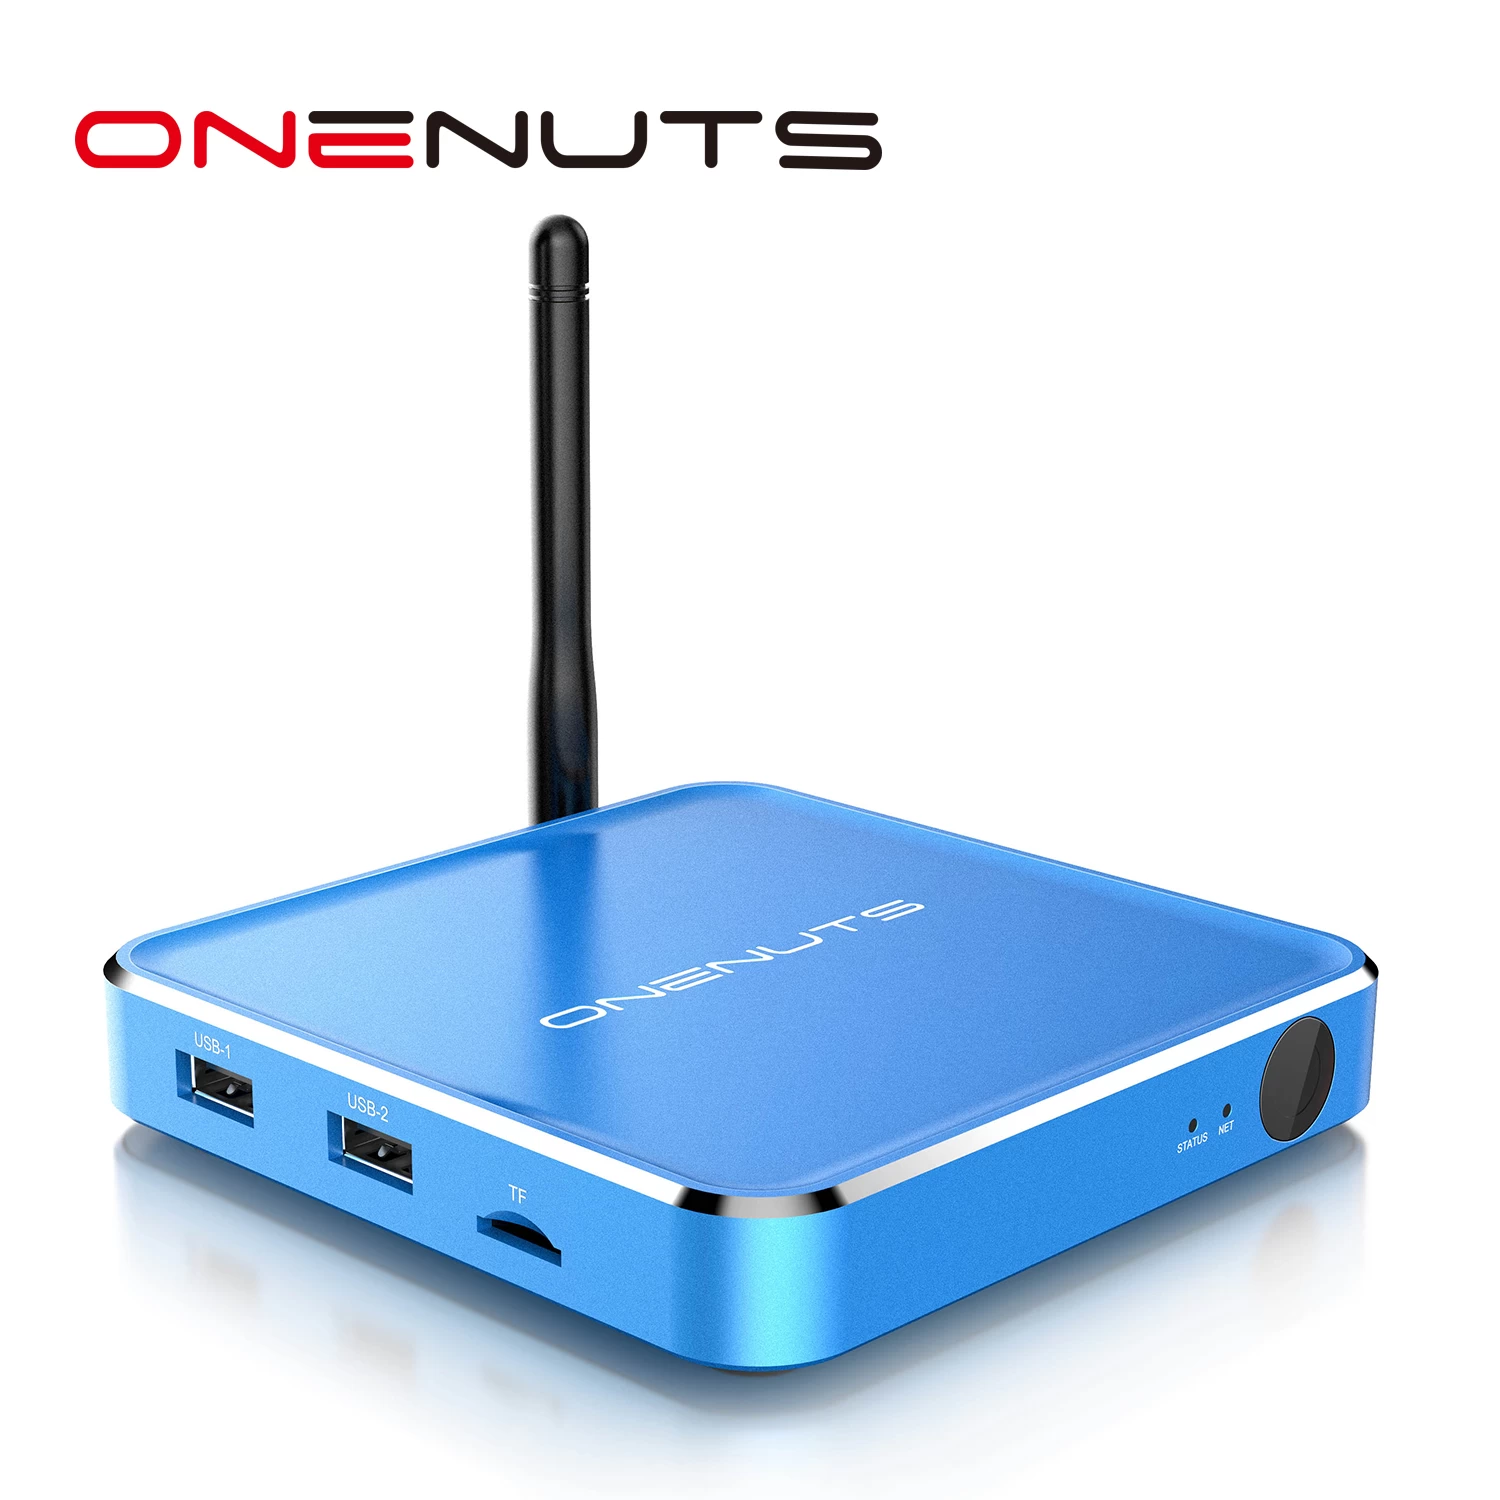 Maximize Entertainment TV Box Android with HDMI, Video Recording, and UDP Broadcasting - Elevate Your TV Experience